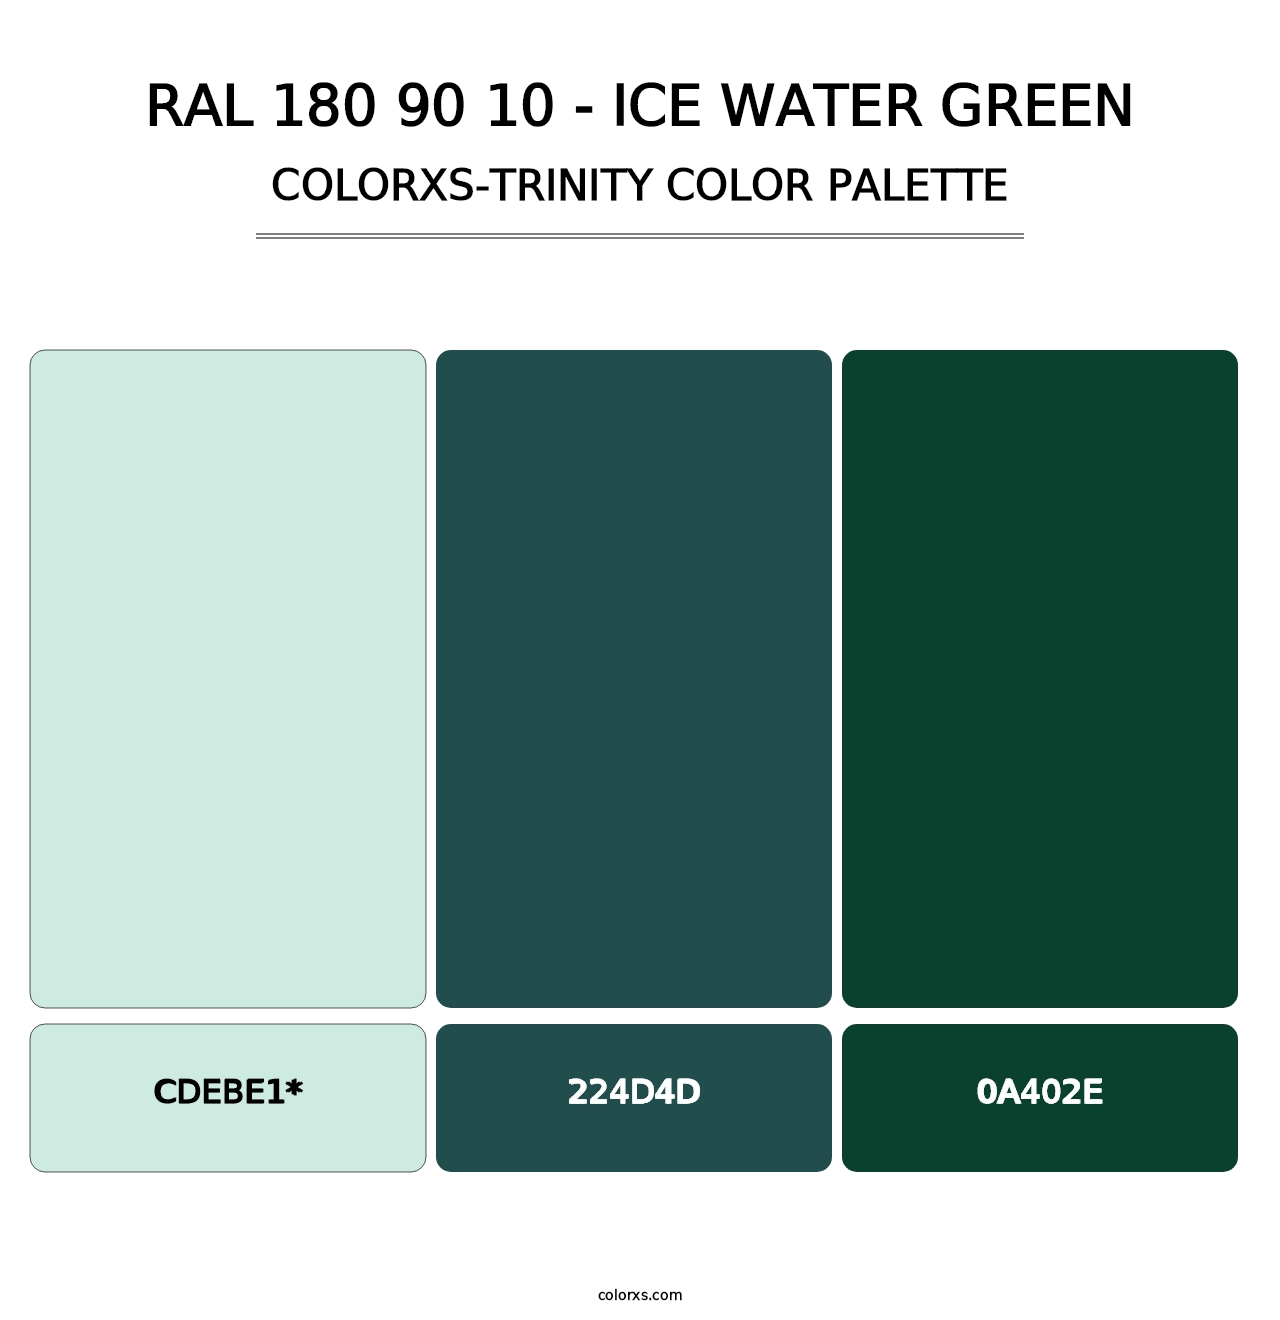 RAL 180 90 10 - Ice Water Green - Colorxs Trinity Palette